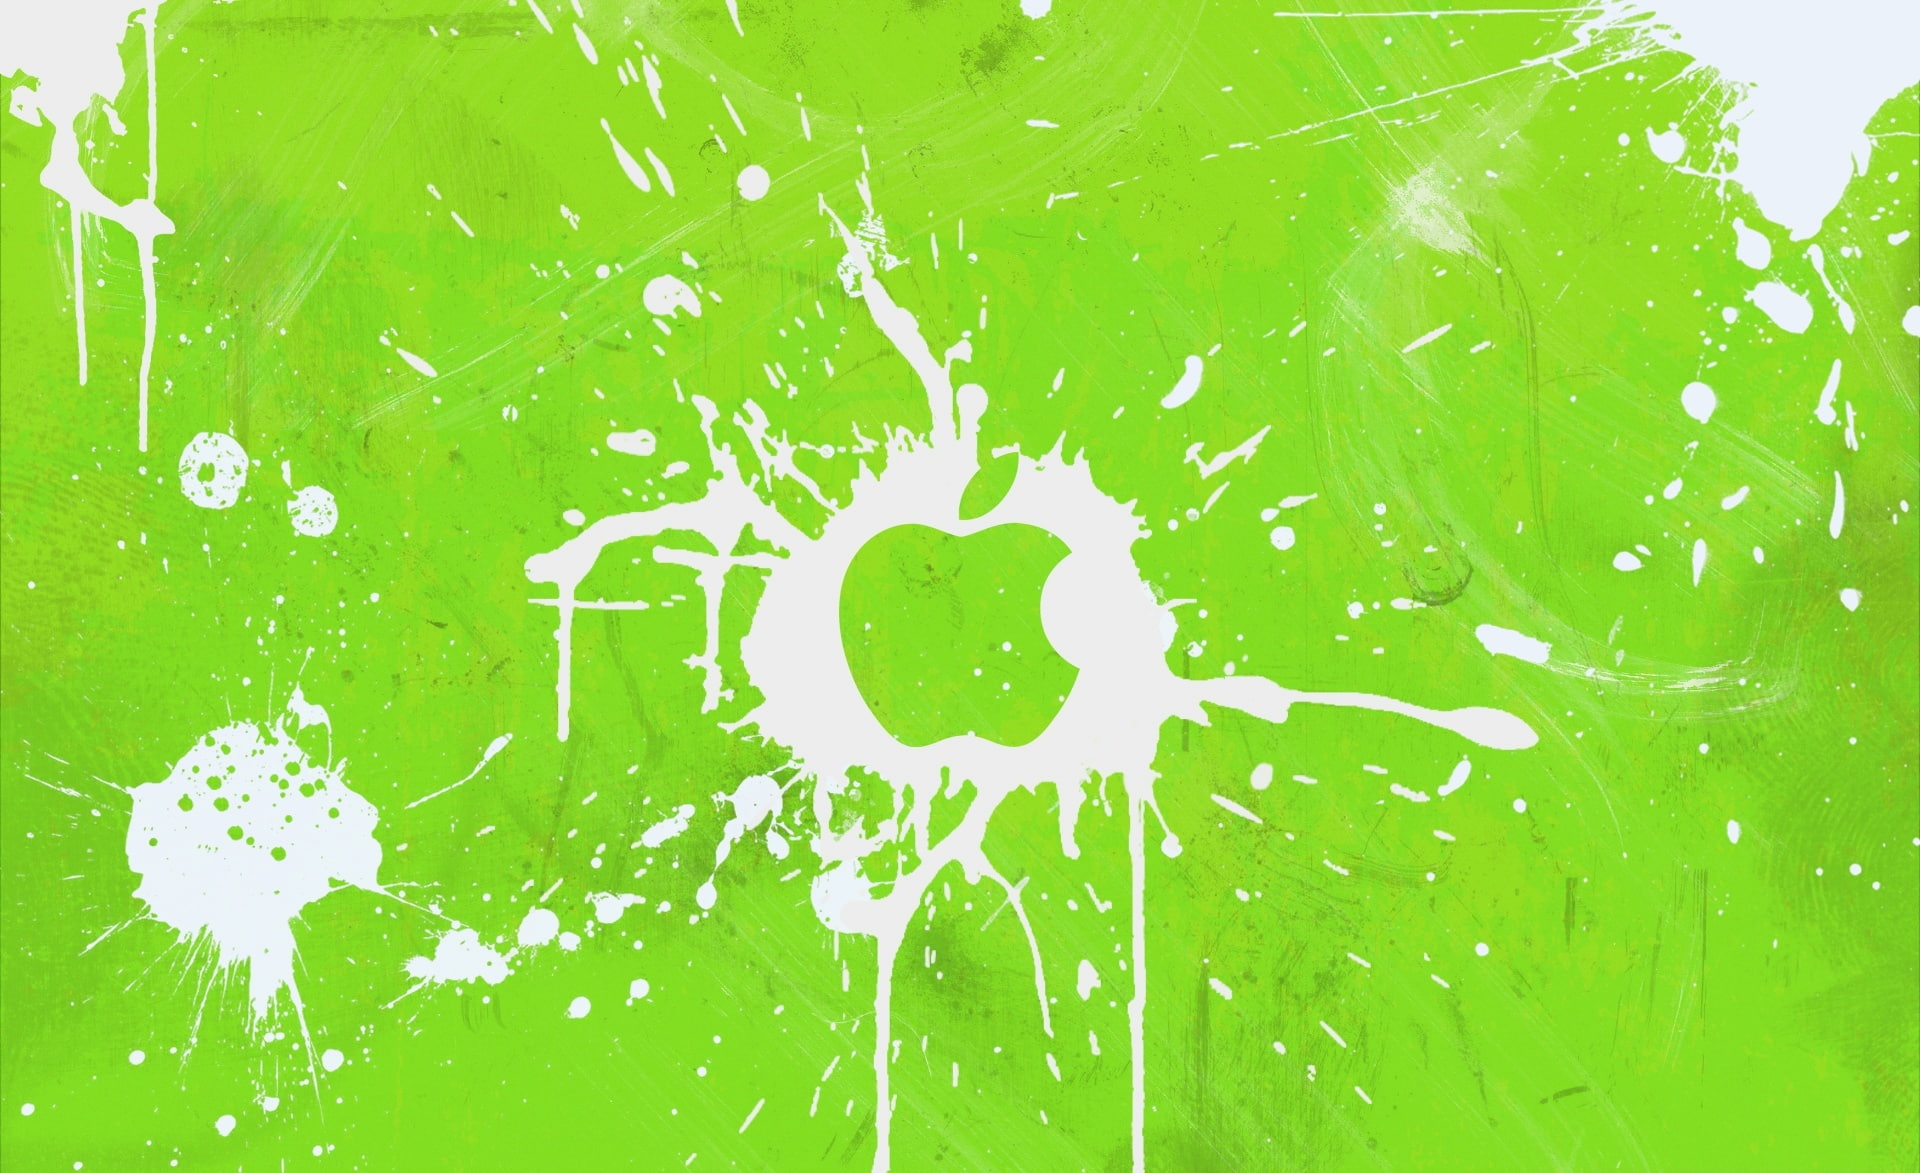 Splash Green, green and white Apple logo, Computers, Mac, green color